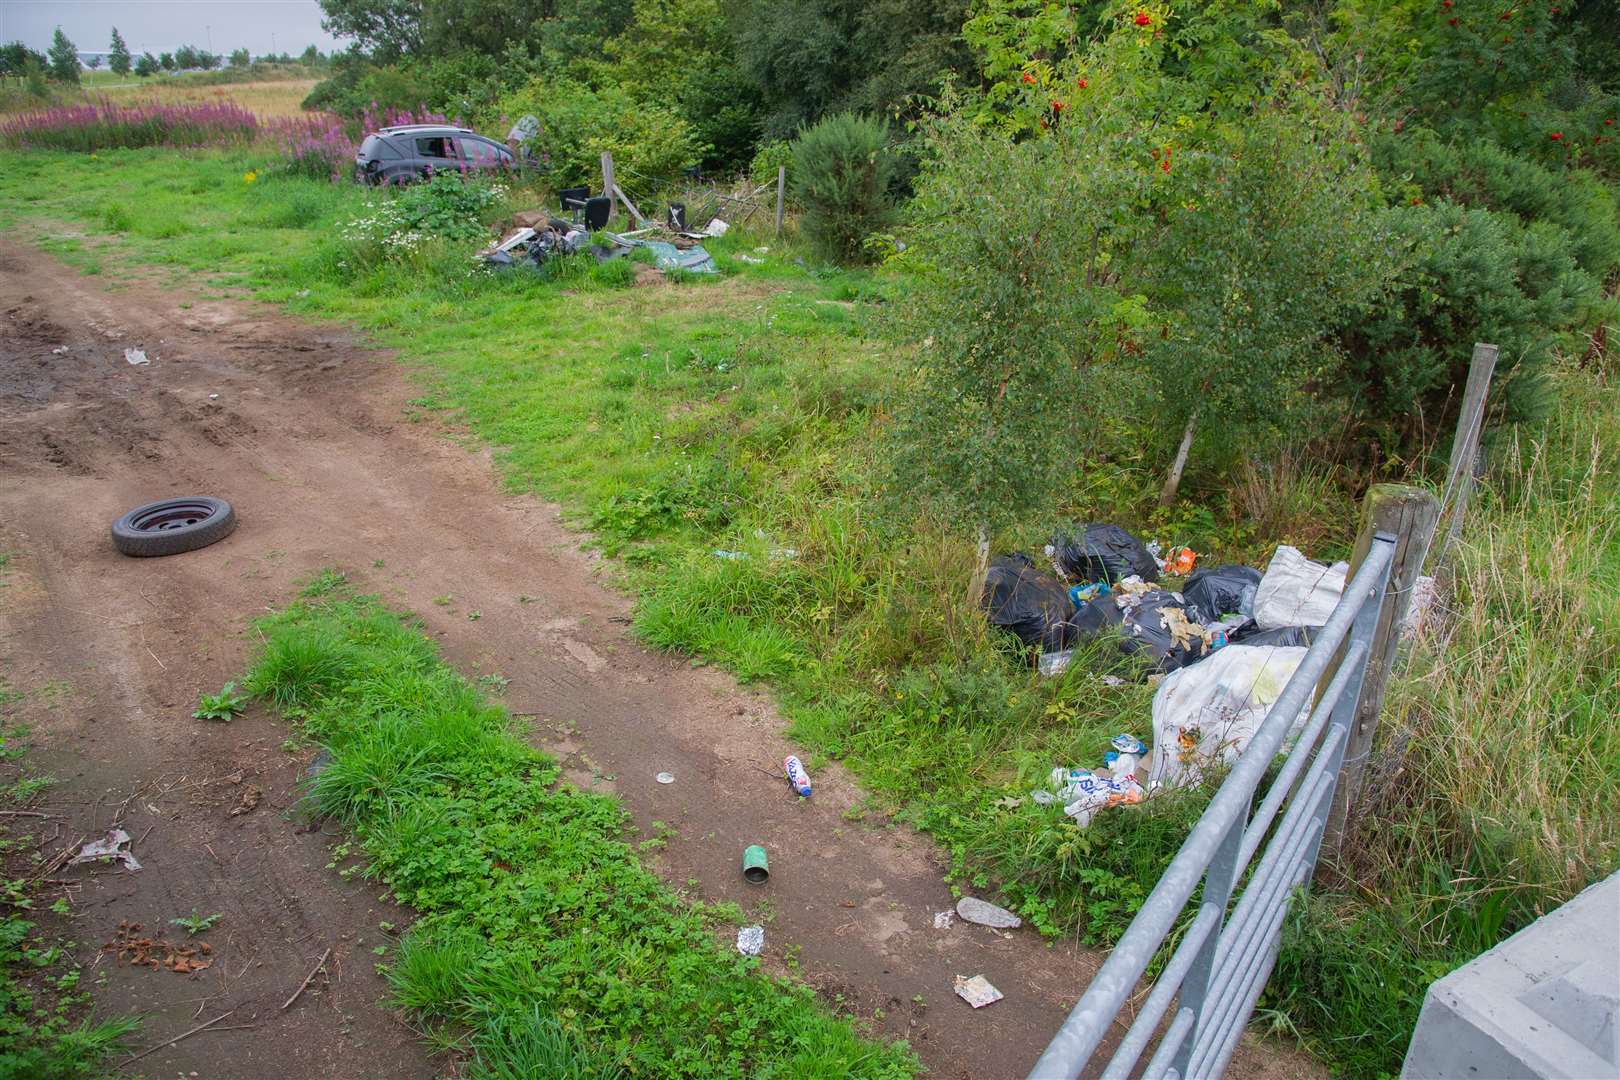 An example of flytipping in Moray...Picture: Highland News & Media..